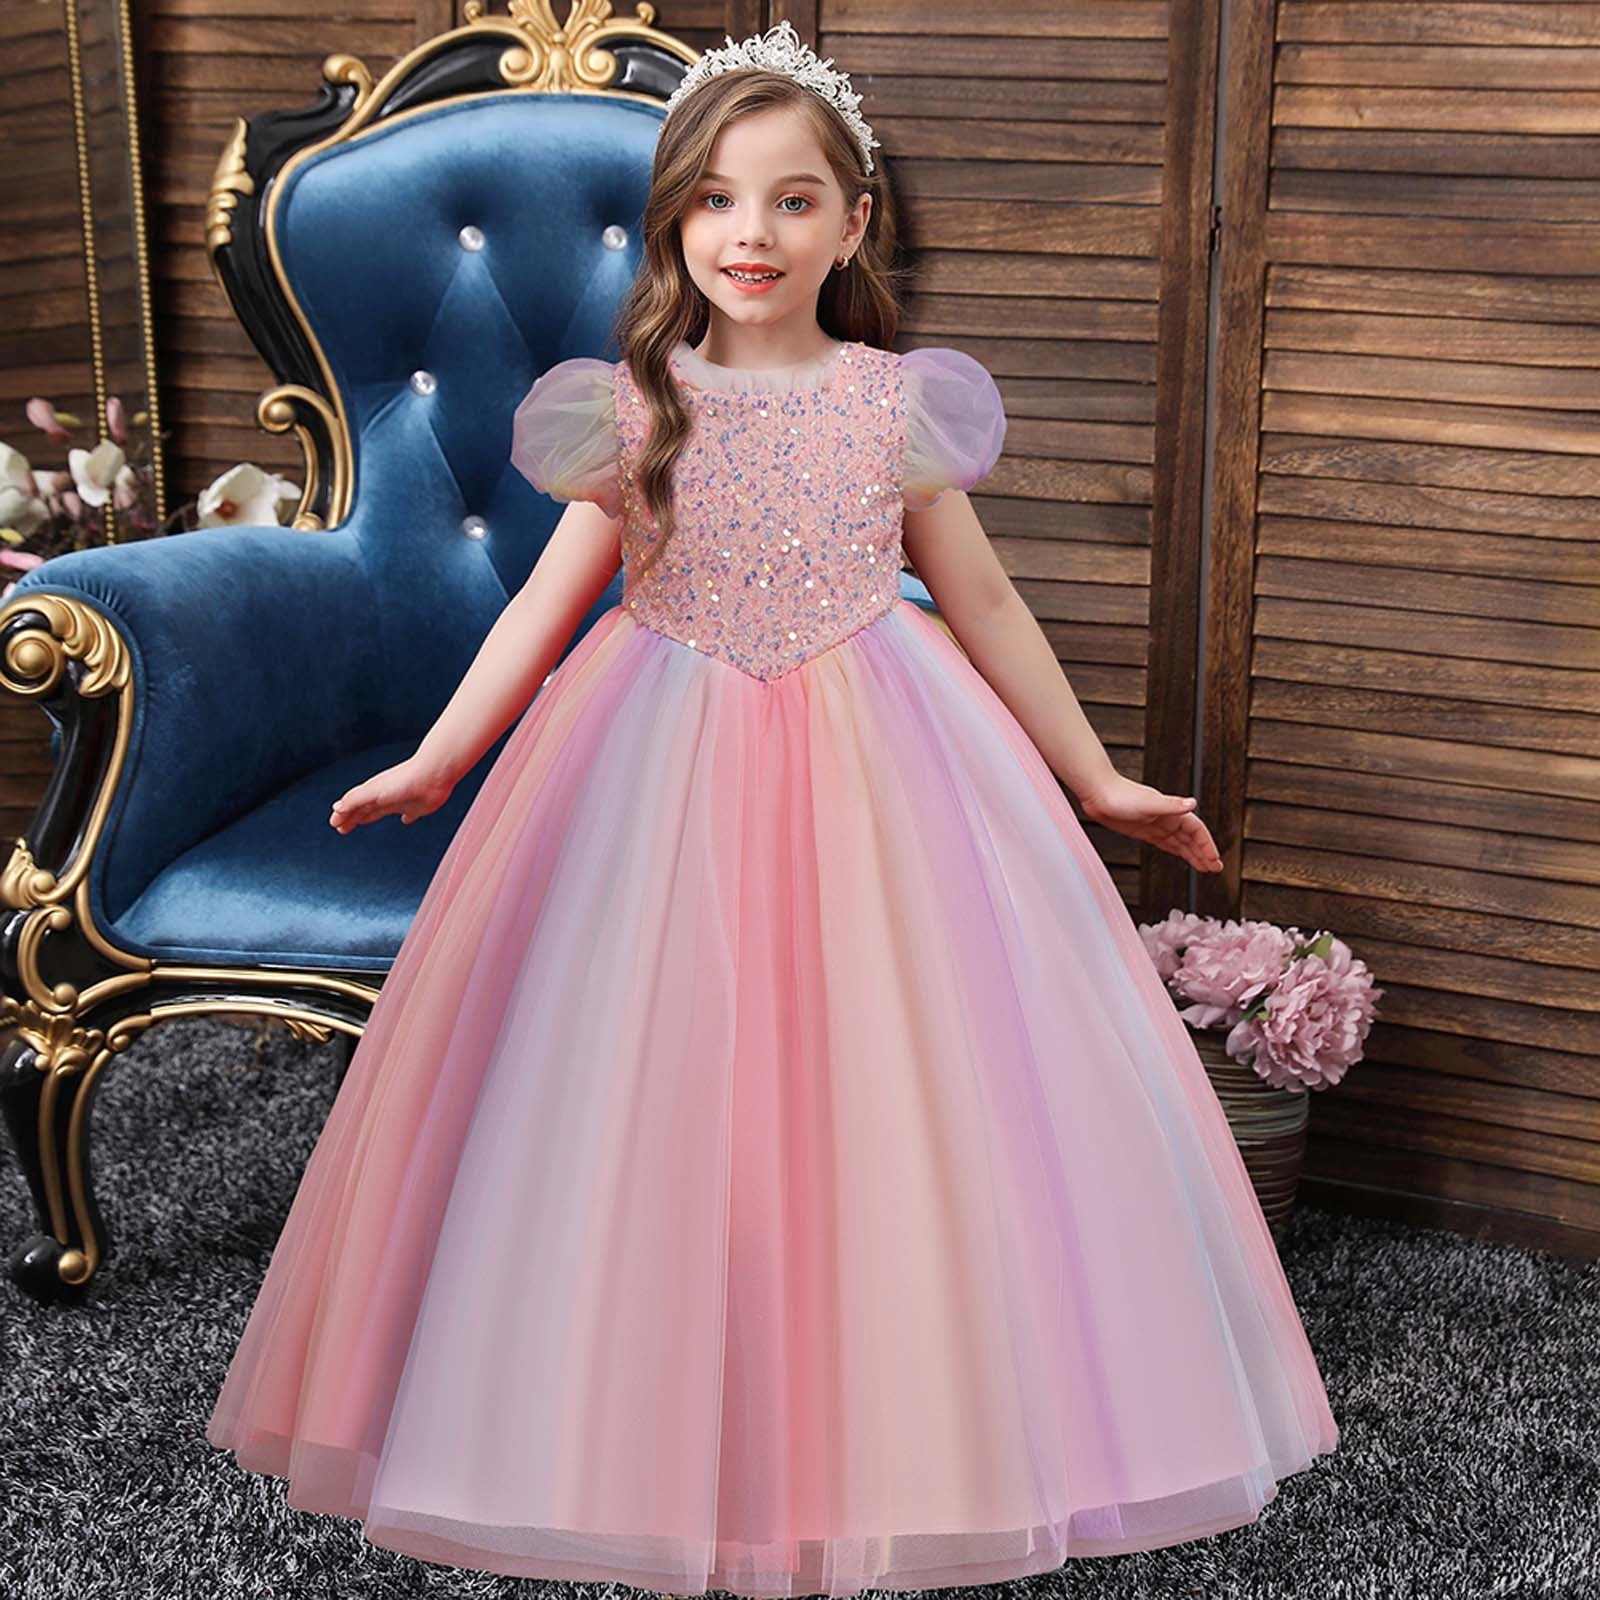 High Fame Girls Maxi Patch Dress (Pink, 7-8 Years) - Buy High Fame Girls  Maxi Patch Dress (Pink, 7-8 Years) Online at Low Price - Snapdeal